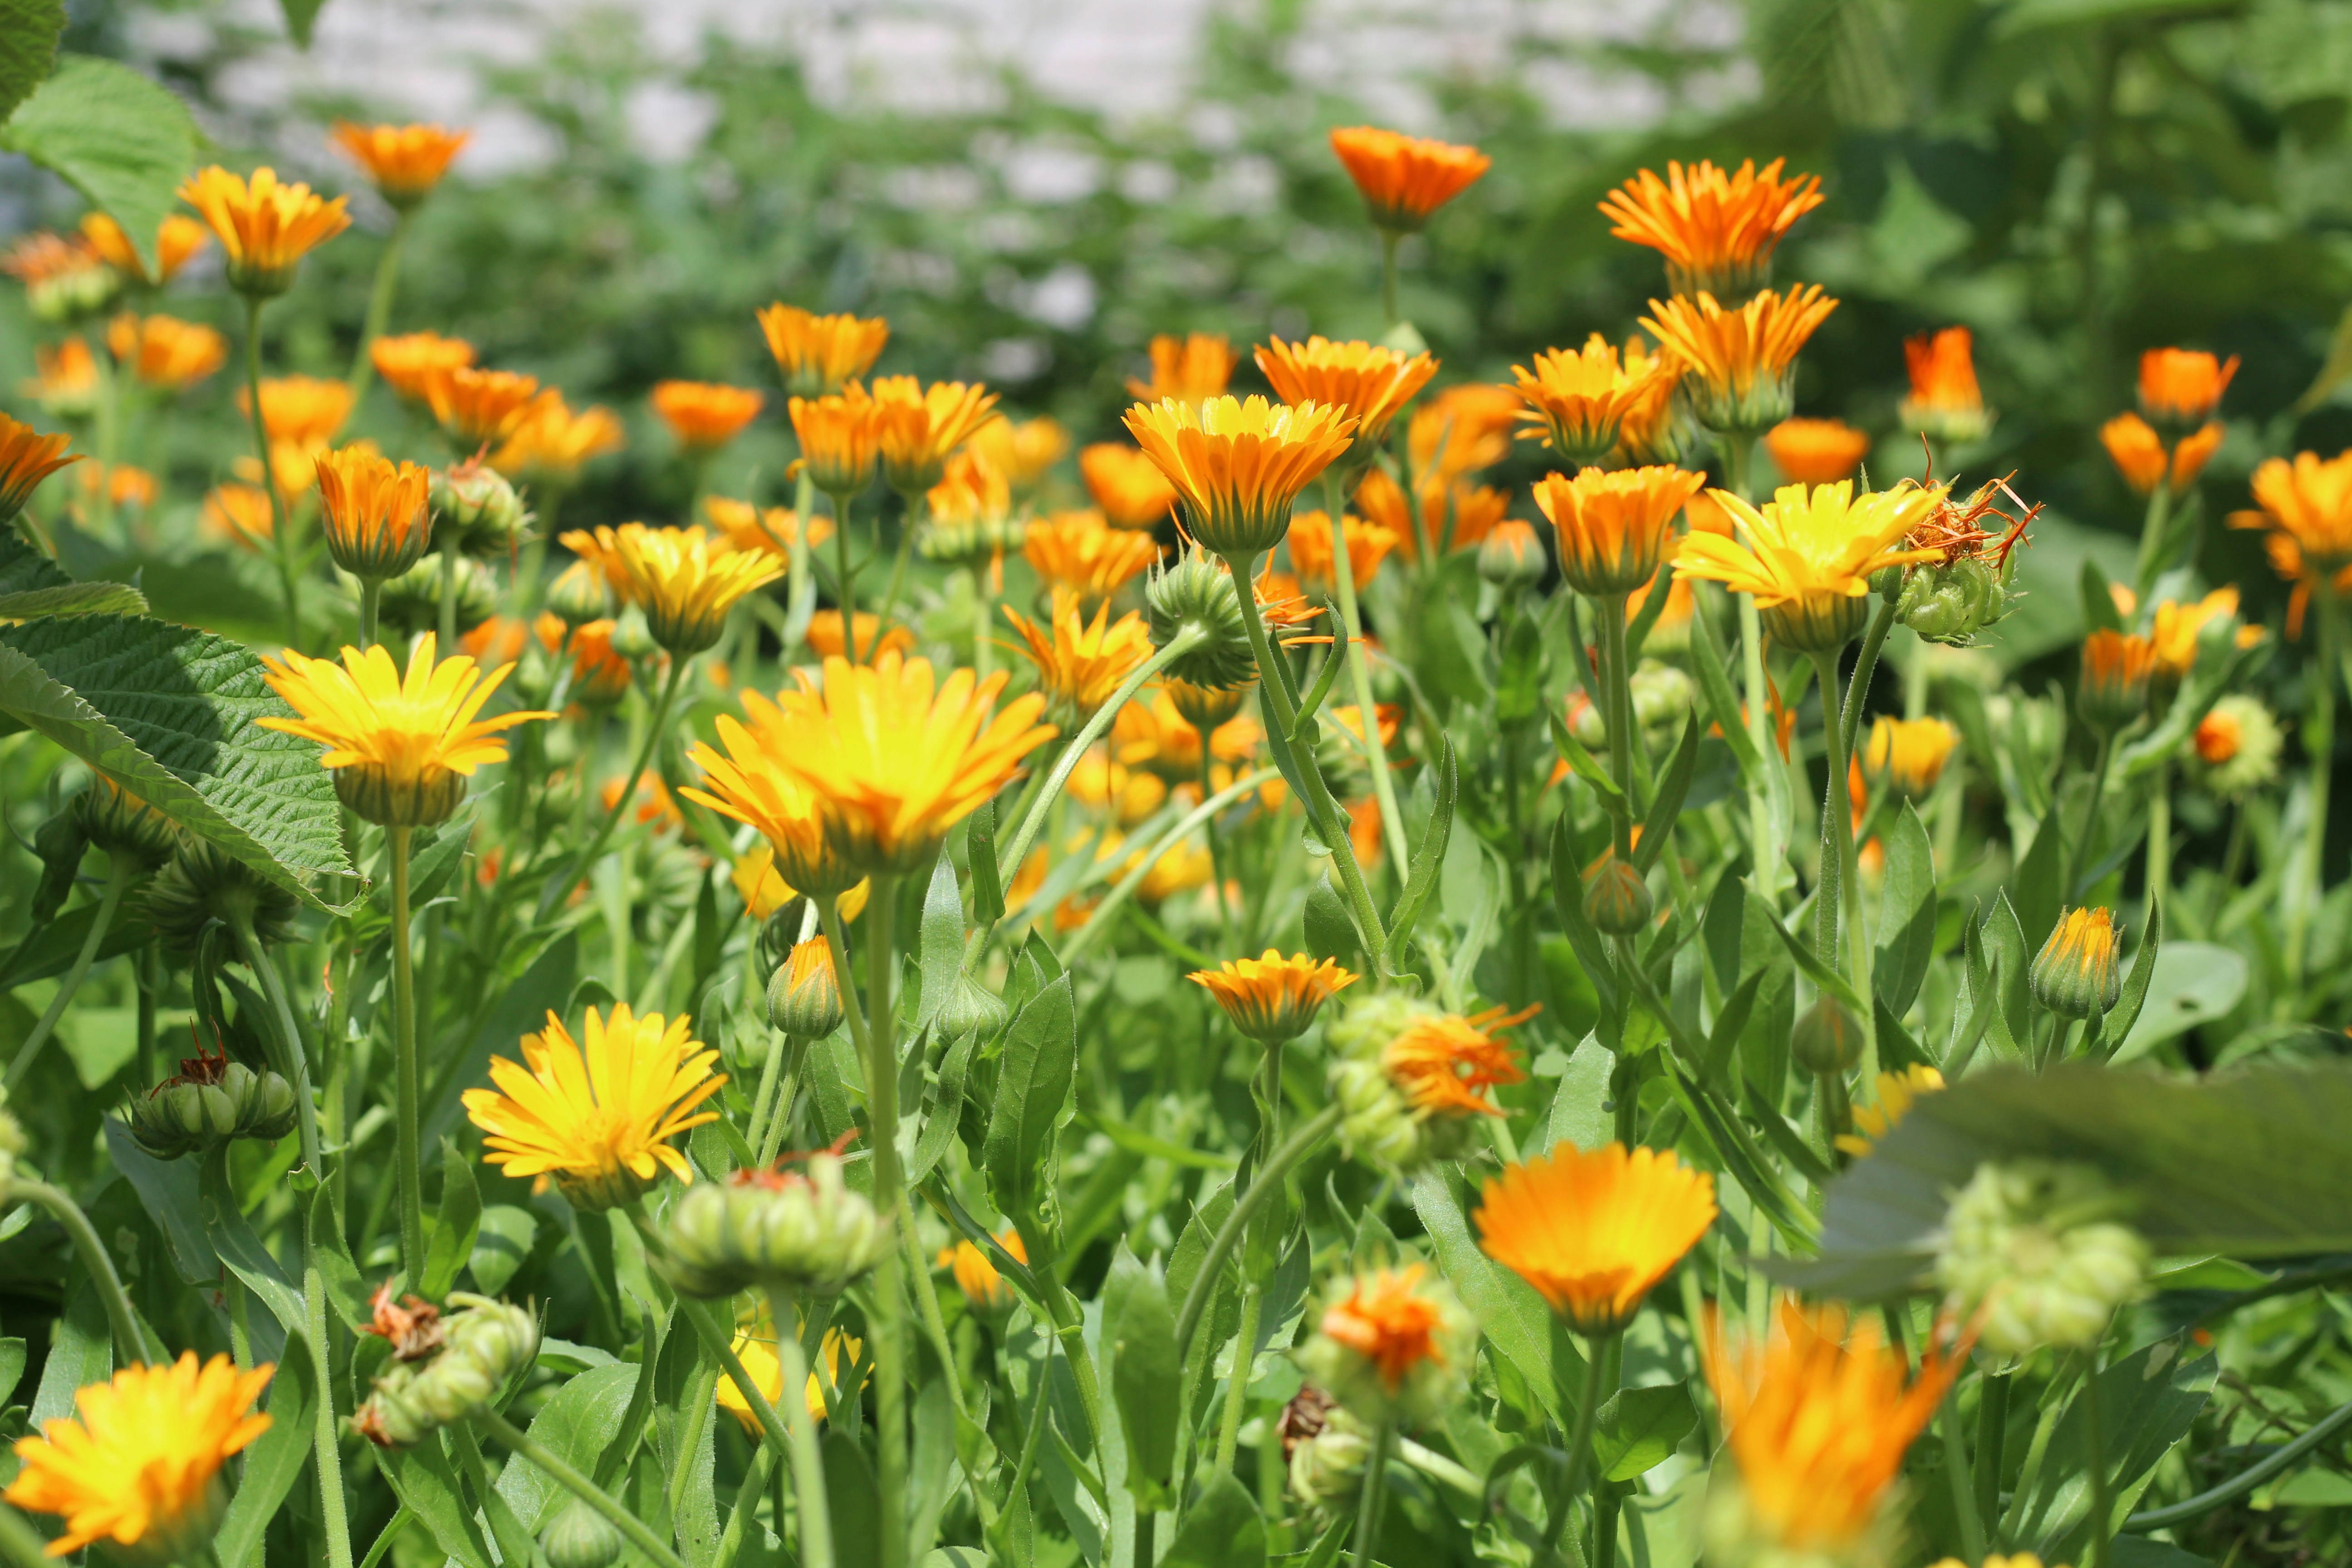 Calendula plants attract pollinators and provide habitat for beneficial predatory insects.